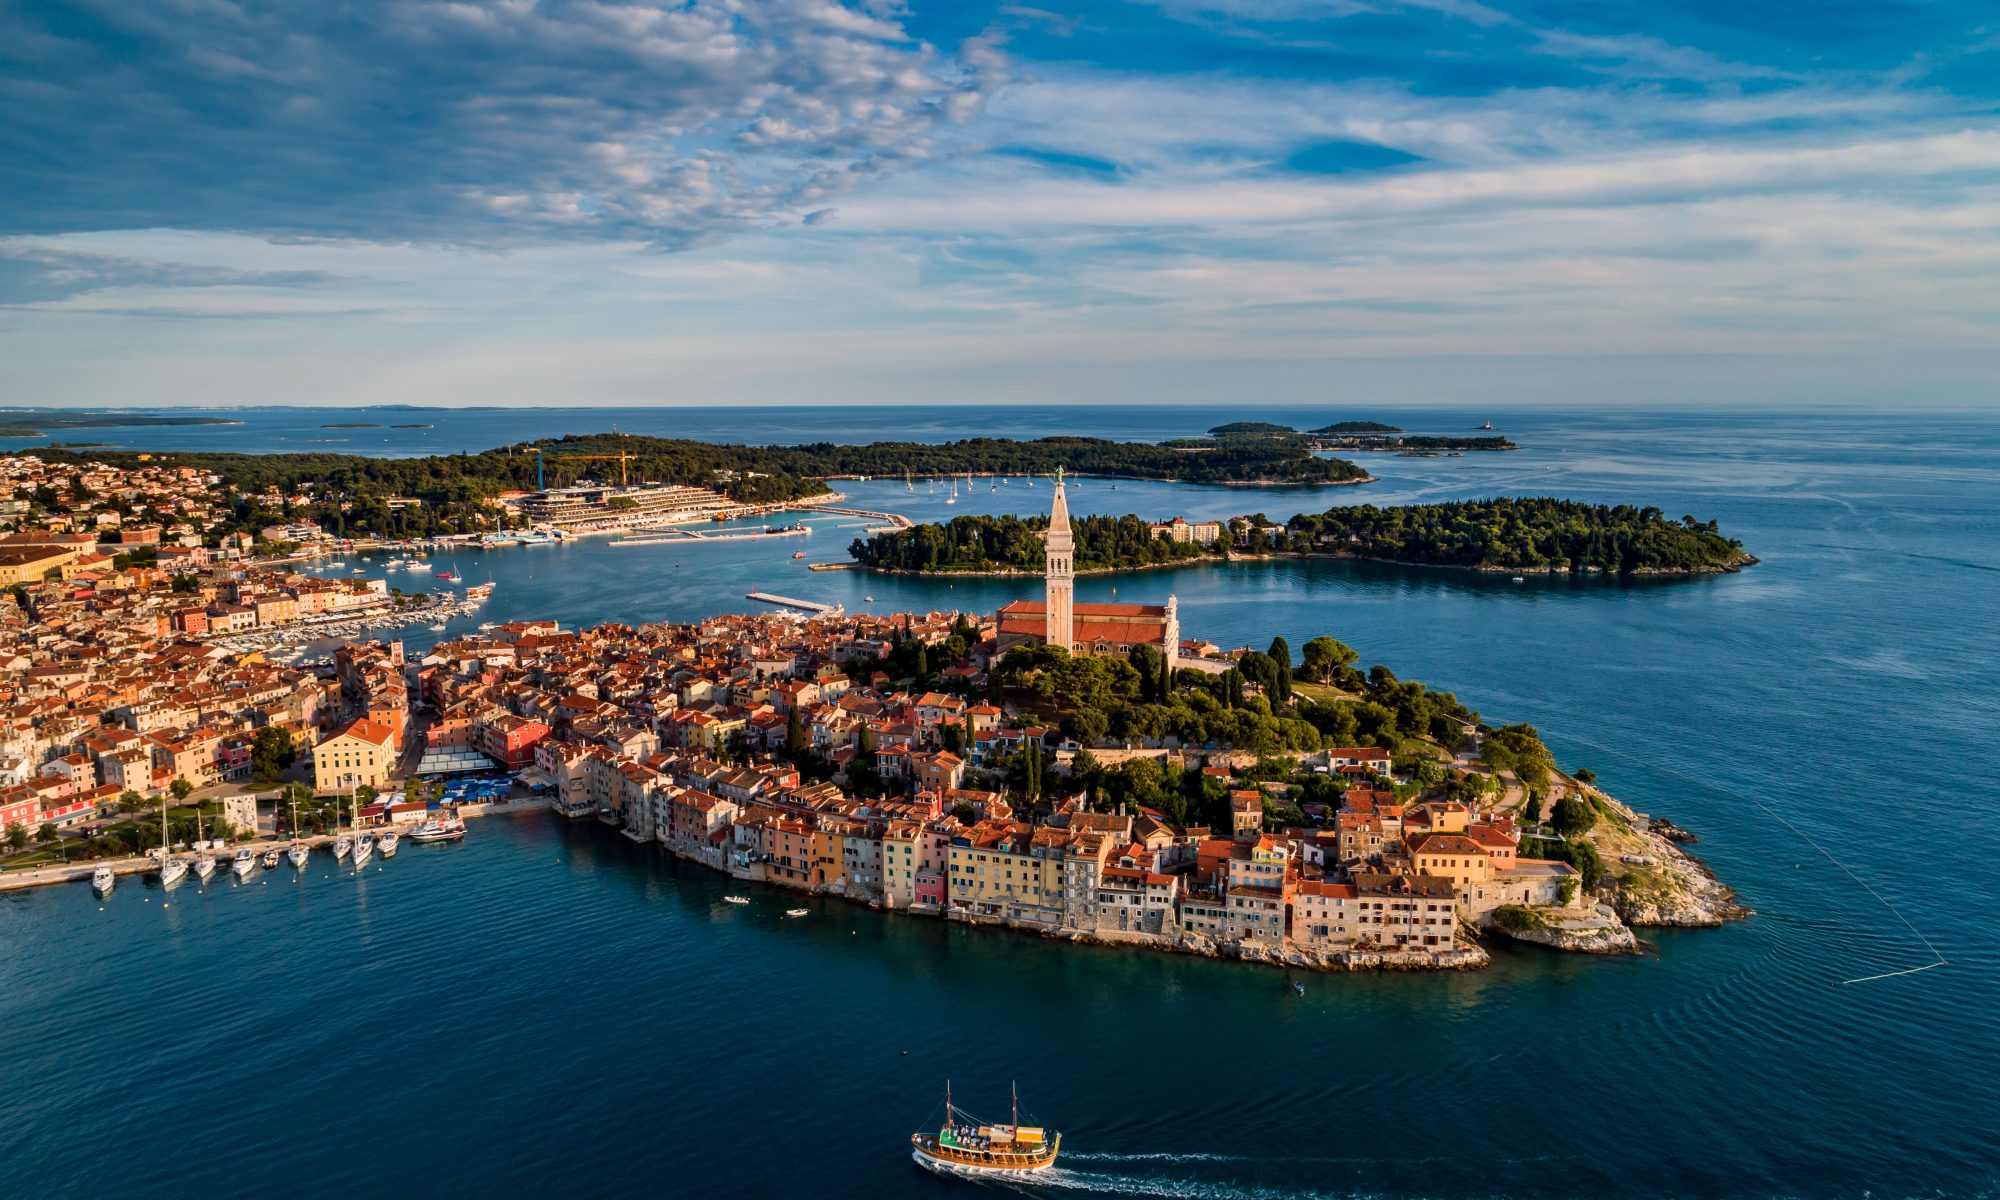 View of the charming town of Rovinj during sunset.